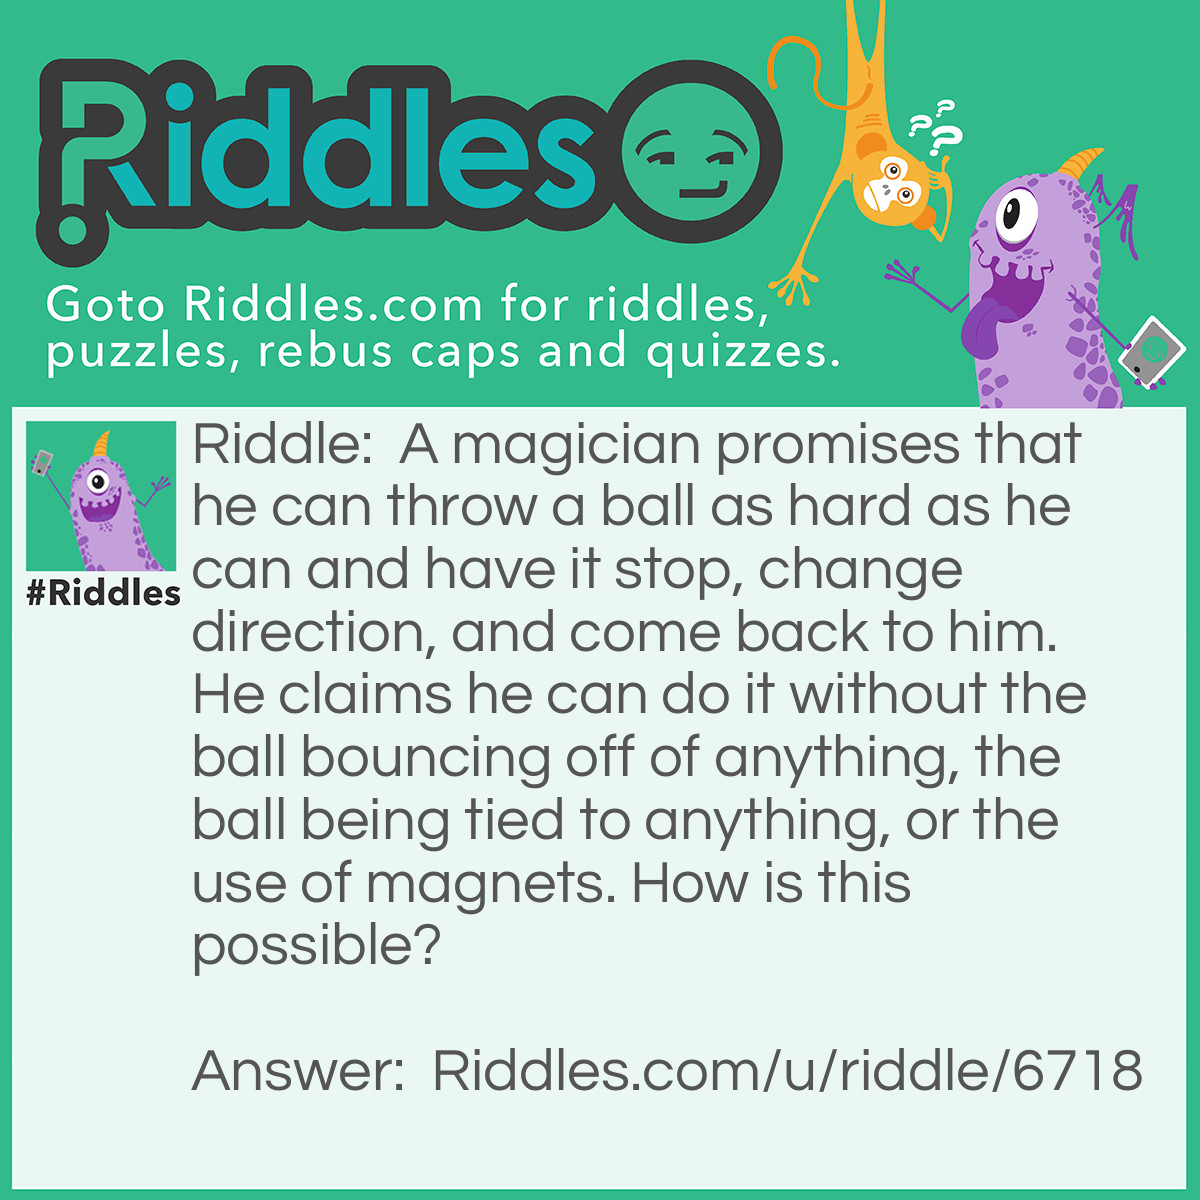 Riddle: A magician promises that he can throw a ball as hard as he can and have it stop, change direction, and come back to him. He claims he can do it without the ball bouncing off of anything, the ball being tied to anything, or the use of magnets. How is this possible? Answer: He throws the ball straight up in the air!